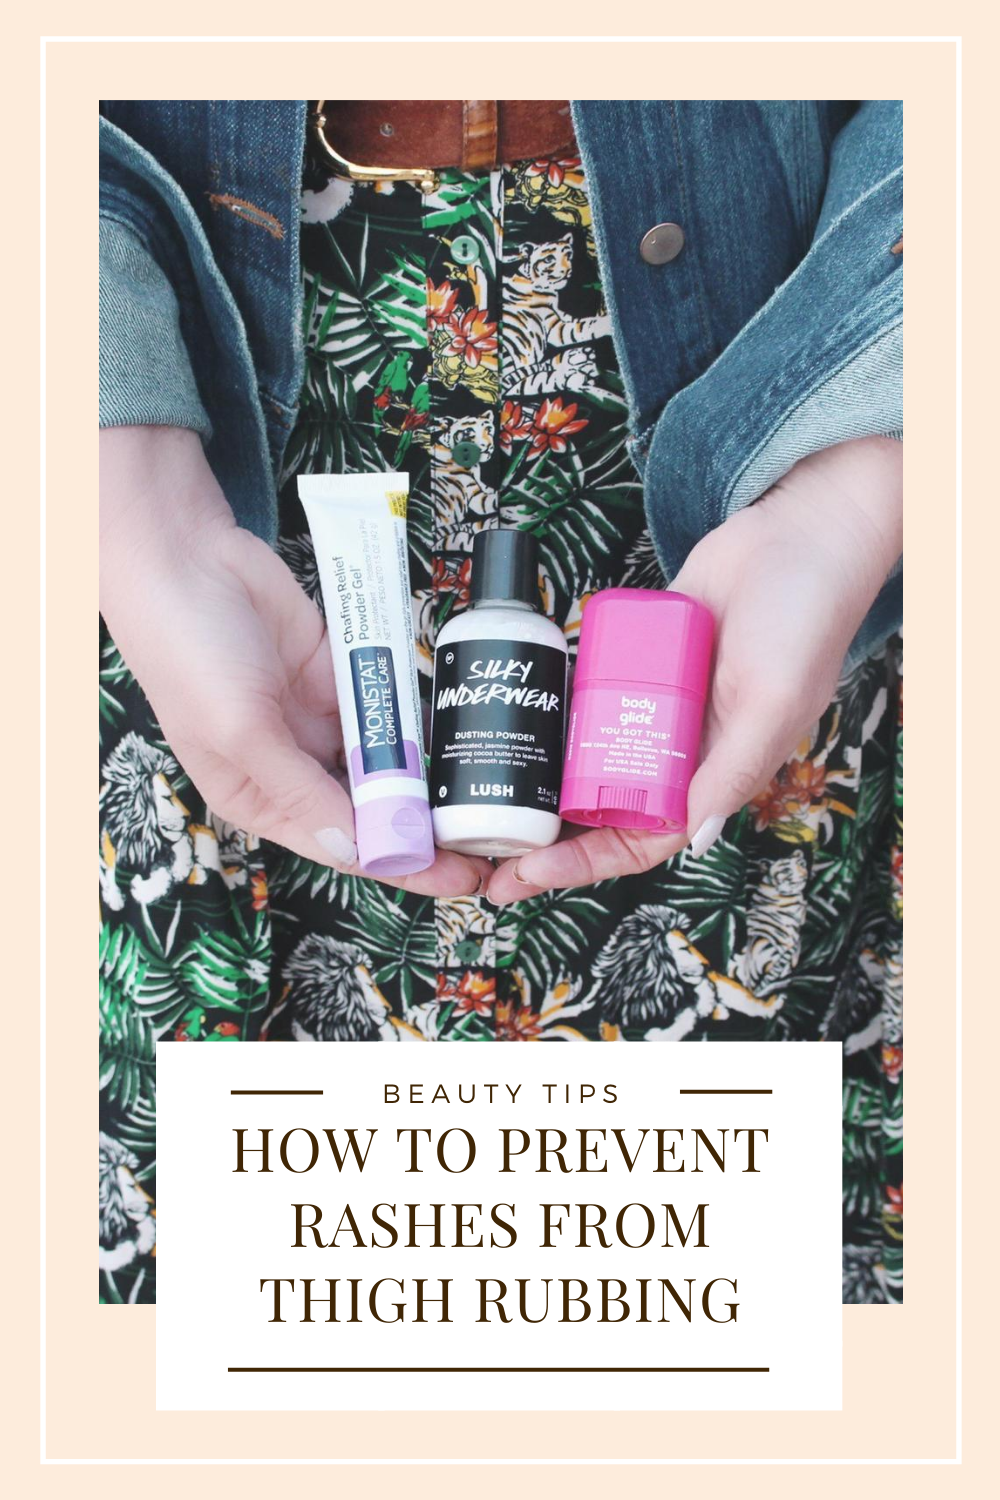 How to prevent rashes from thigh rubbing